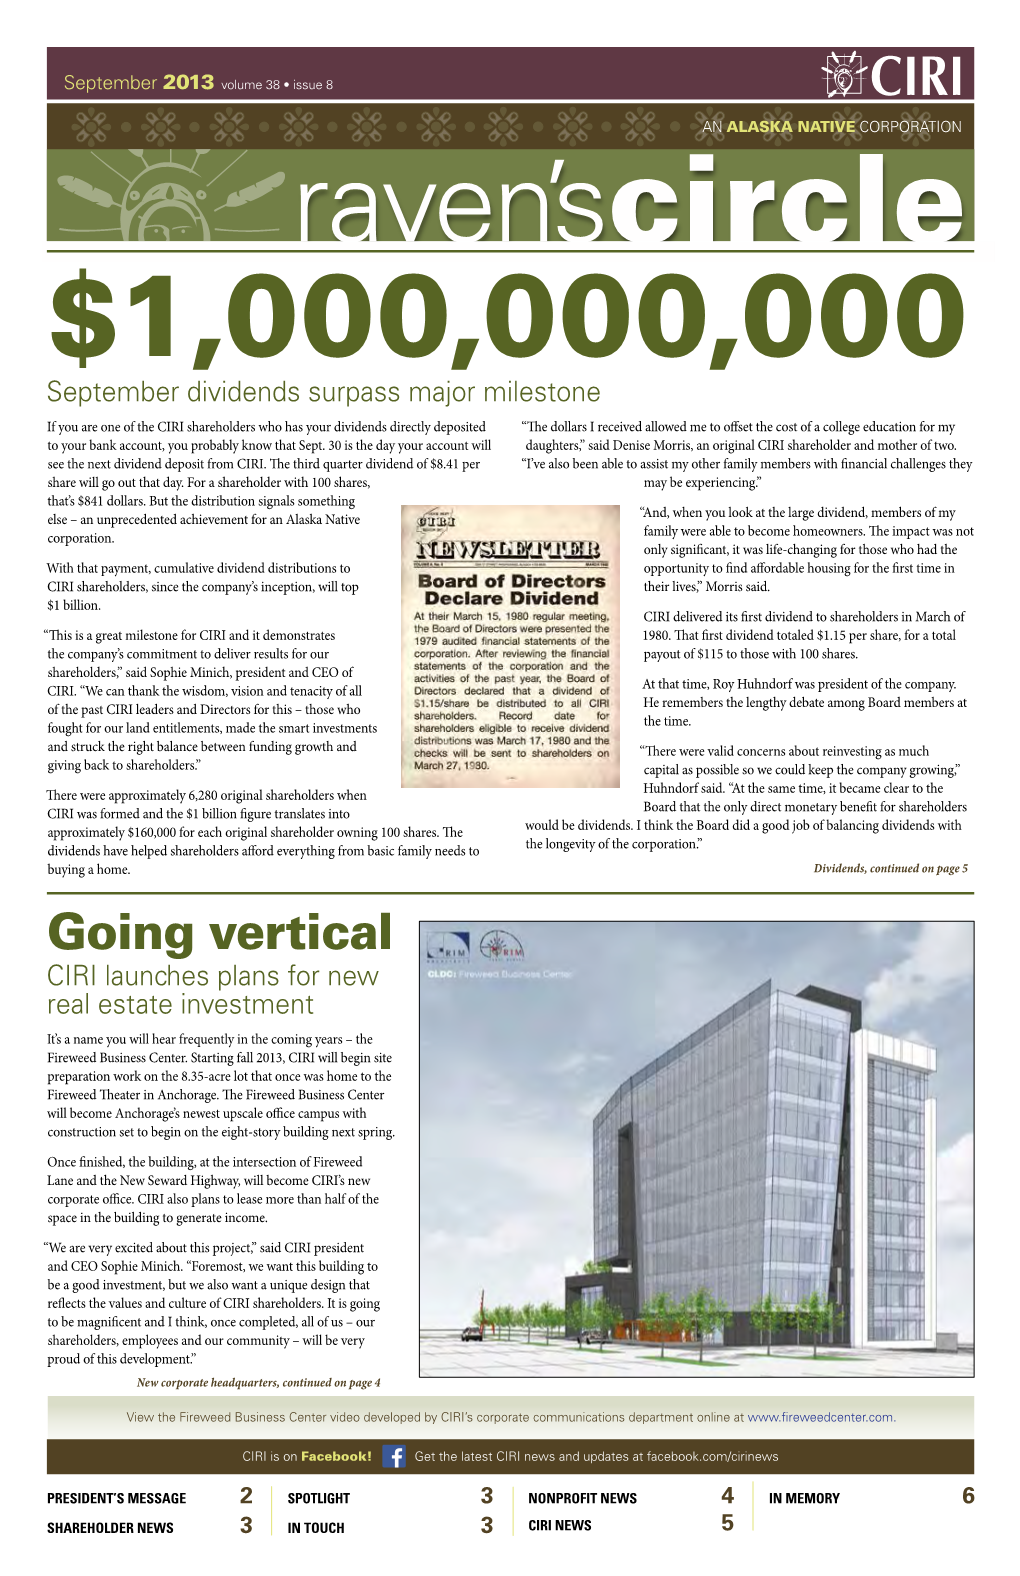 Going Vertical CIRI Launches Plans for New Real Estate Investment It’S a Name You Will Hear Frequently in the Coming Years – the Fireweed Business Center